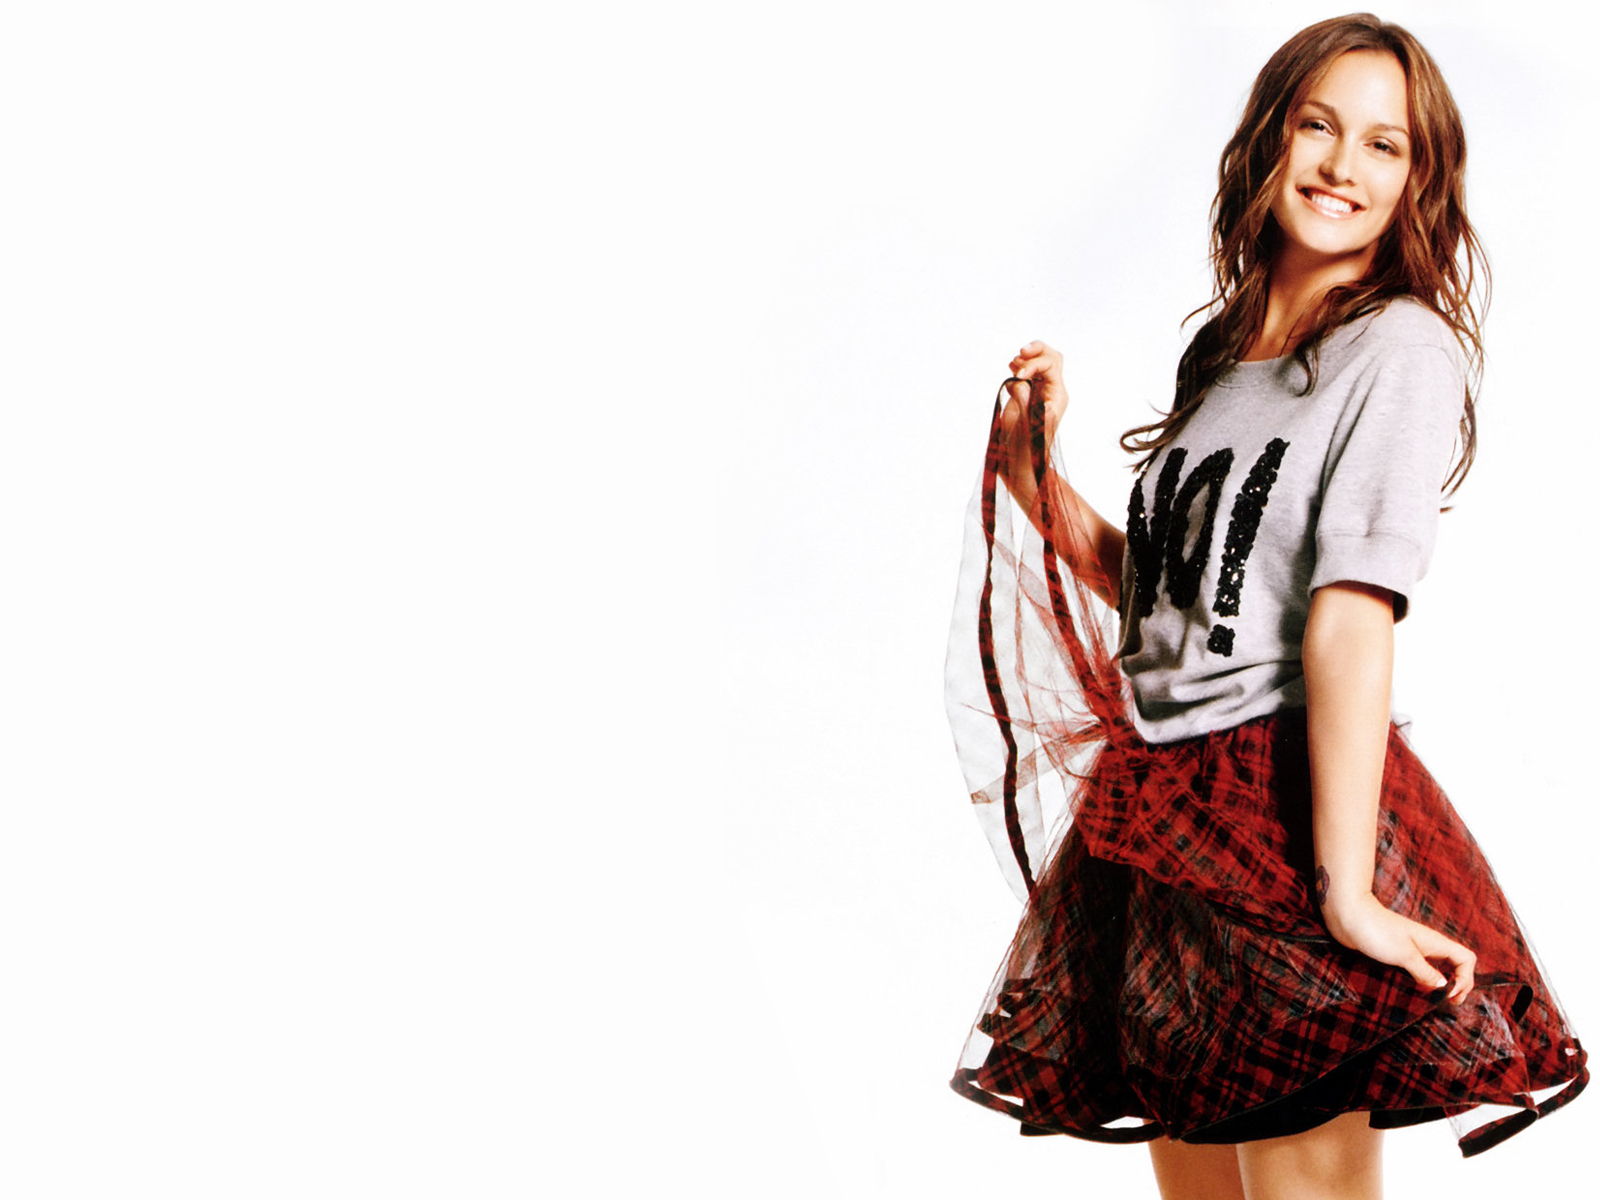 Leighton Meester Wallpaper Pictures Photos Image Pics